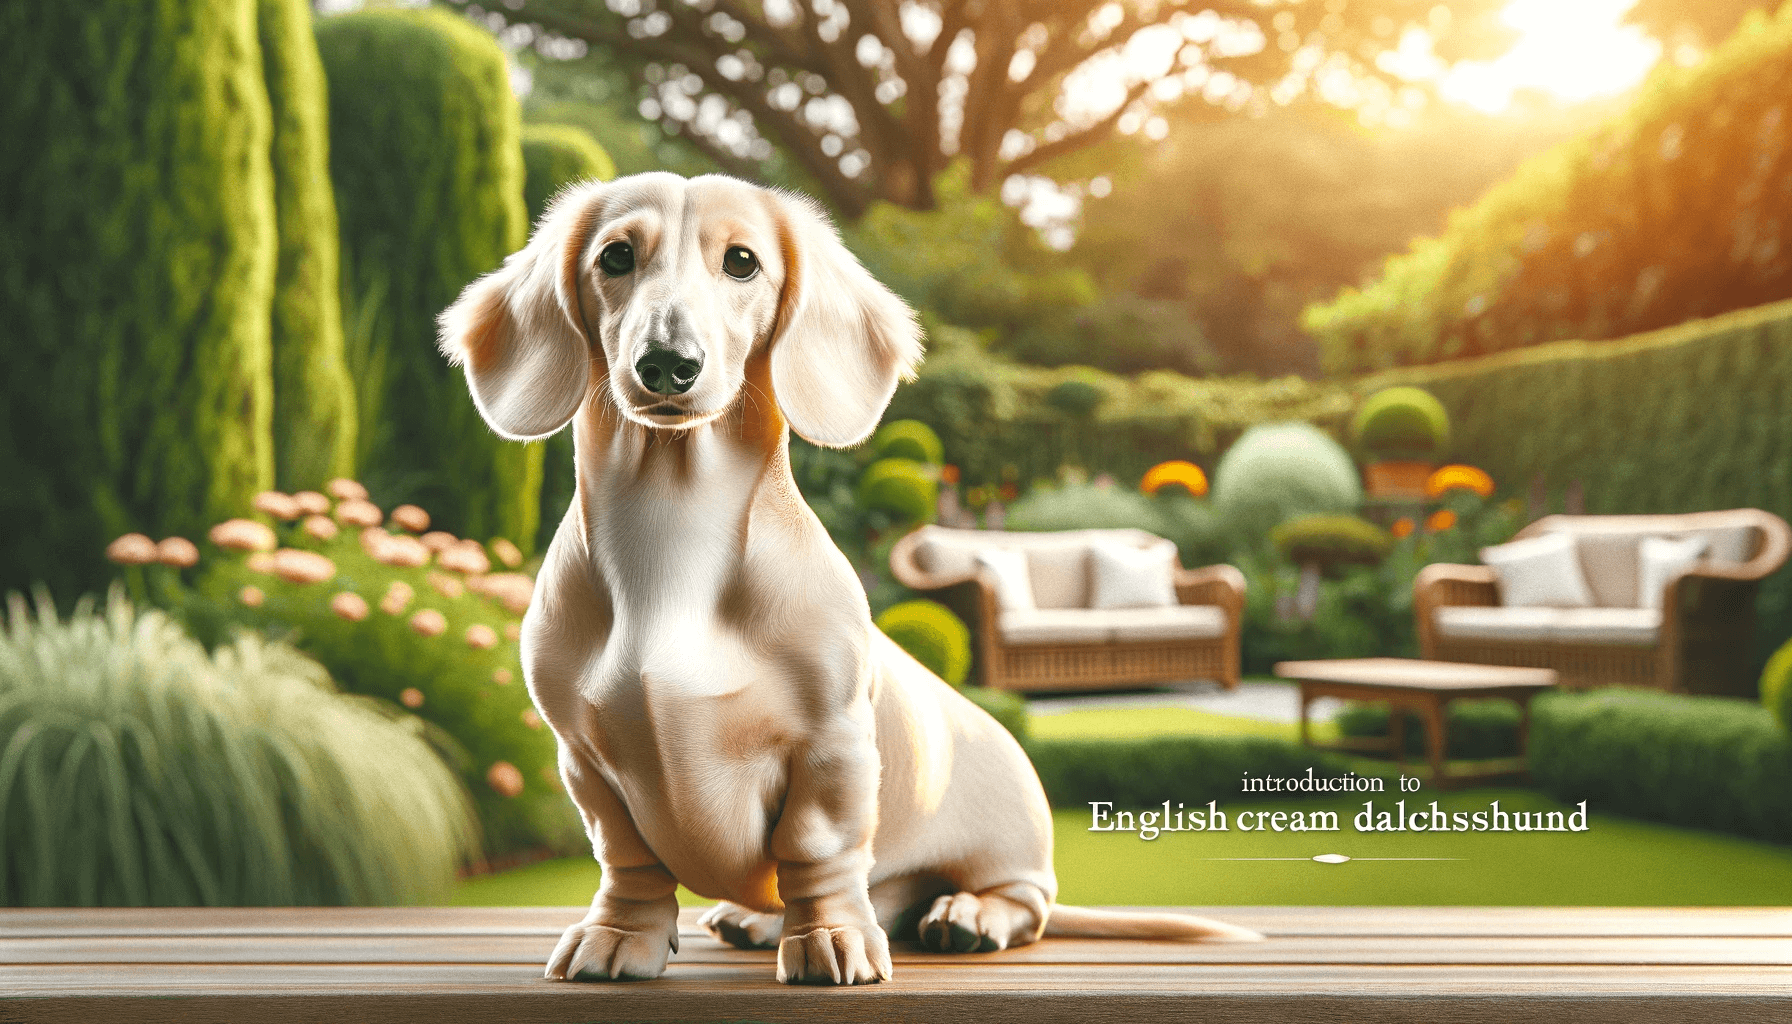 Tips for Extending the Lifespan of English Cream Dachshunds